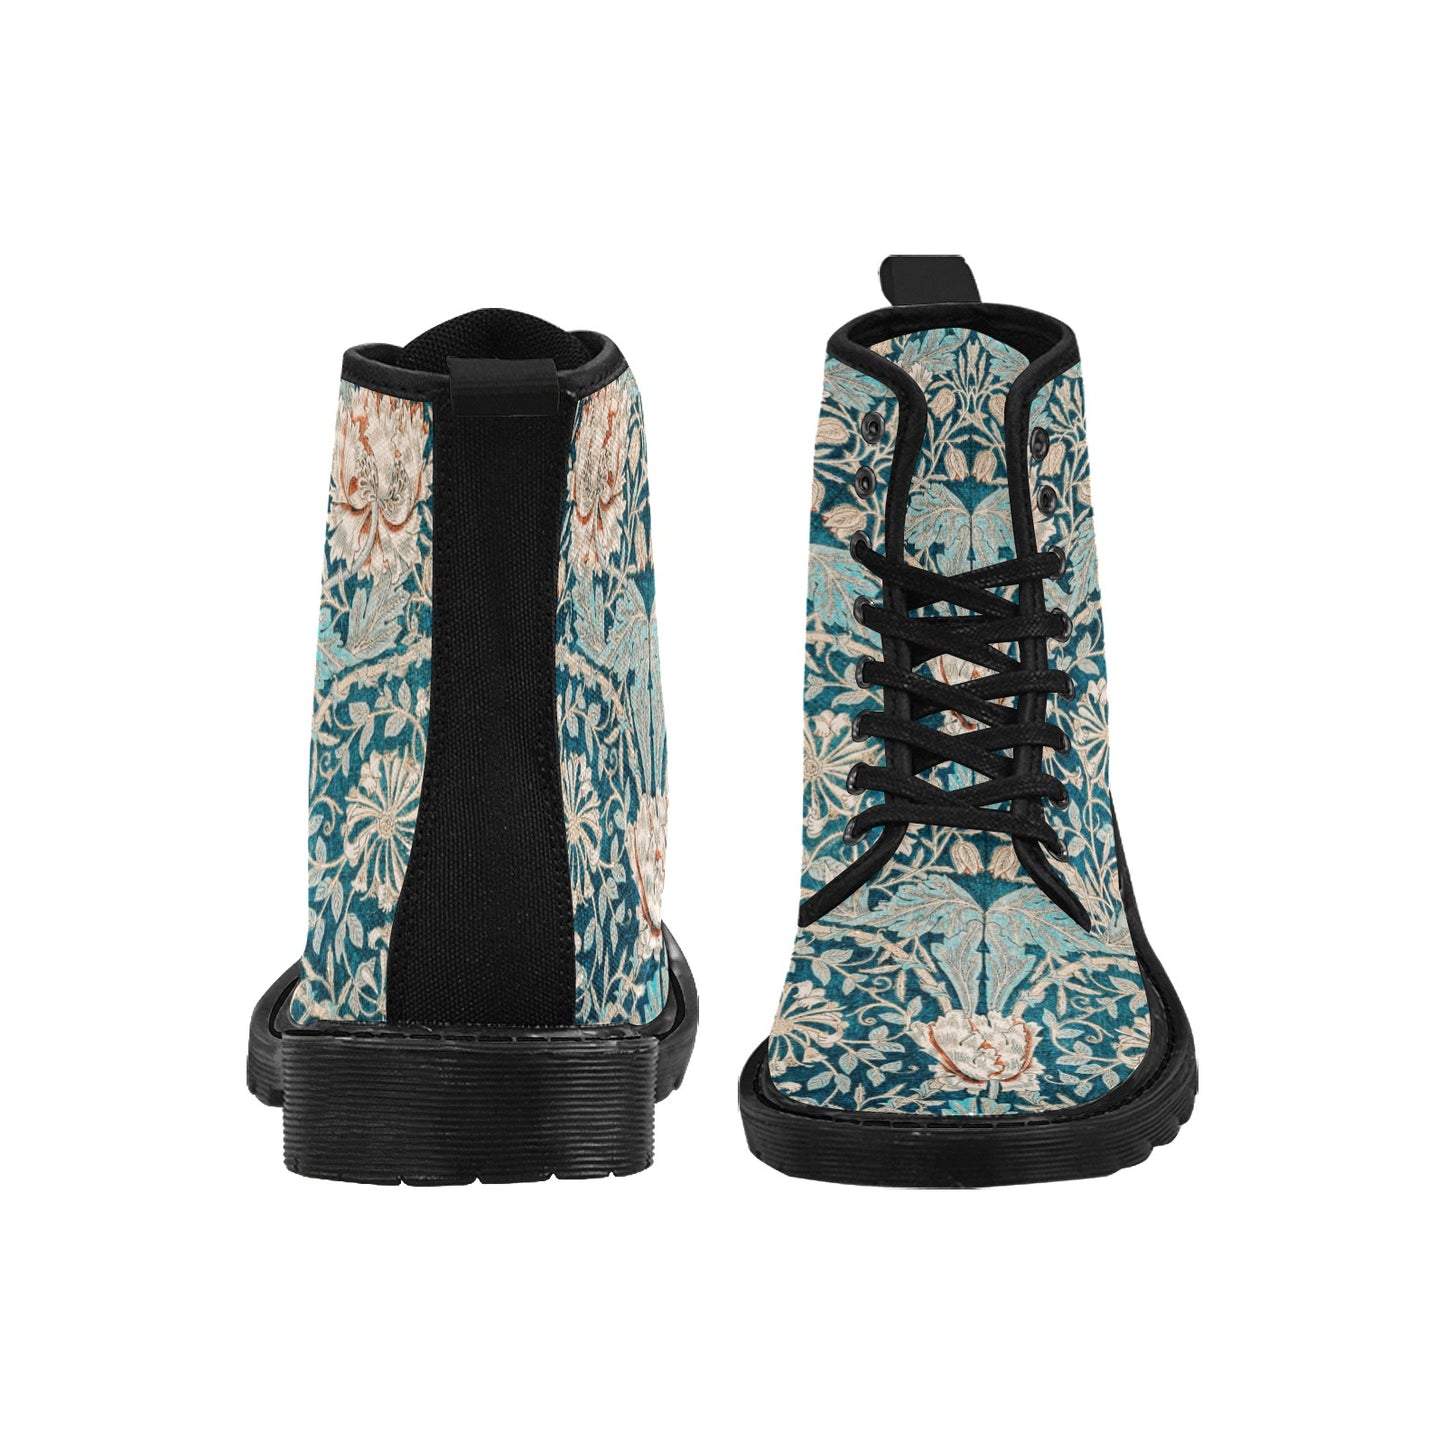 Women’s Flowered Canvas Boots with Hyacinth William Morris Wallpaper Design